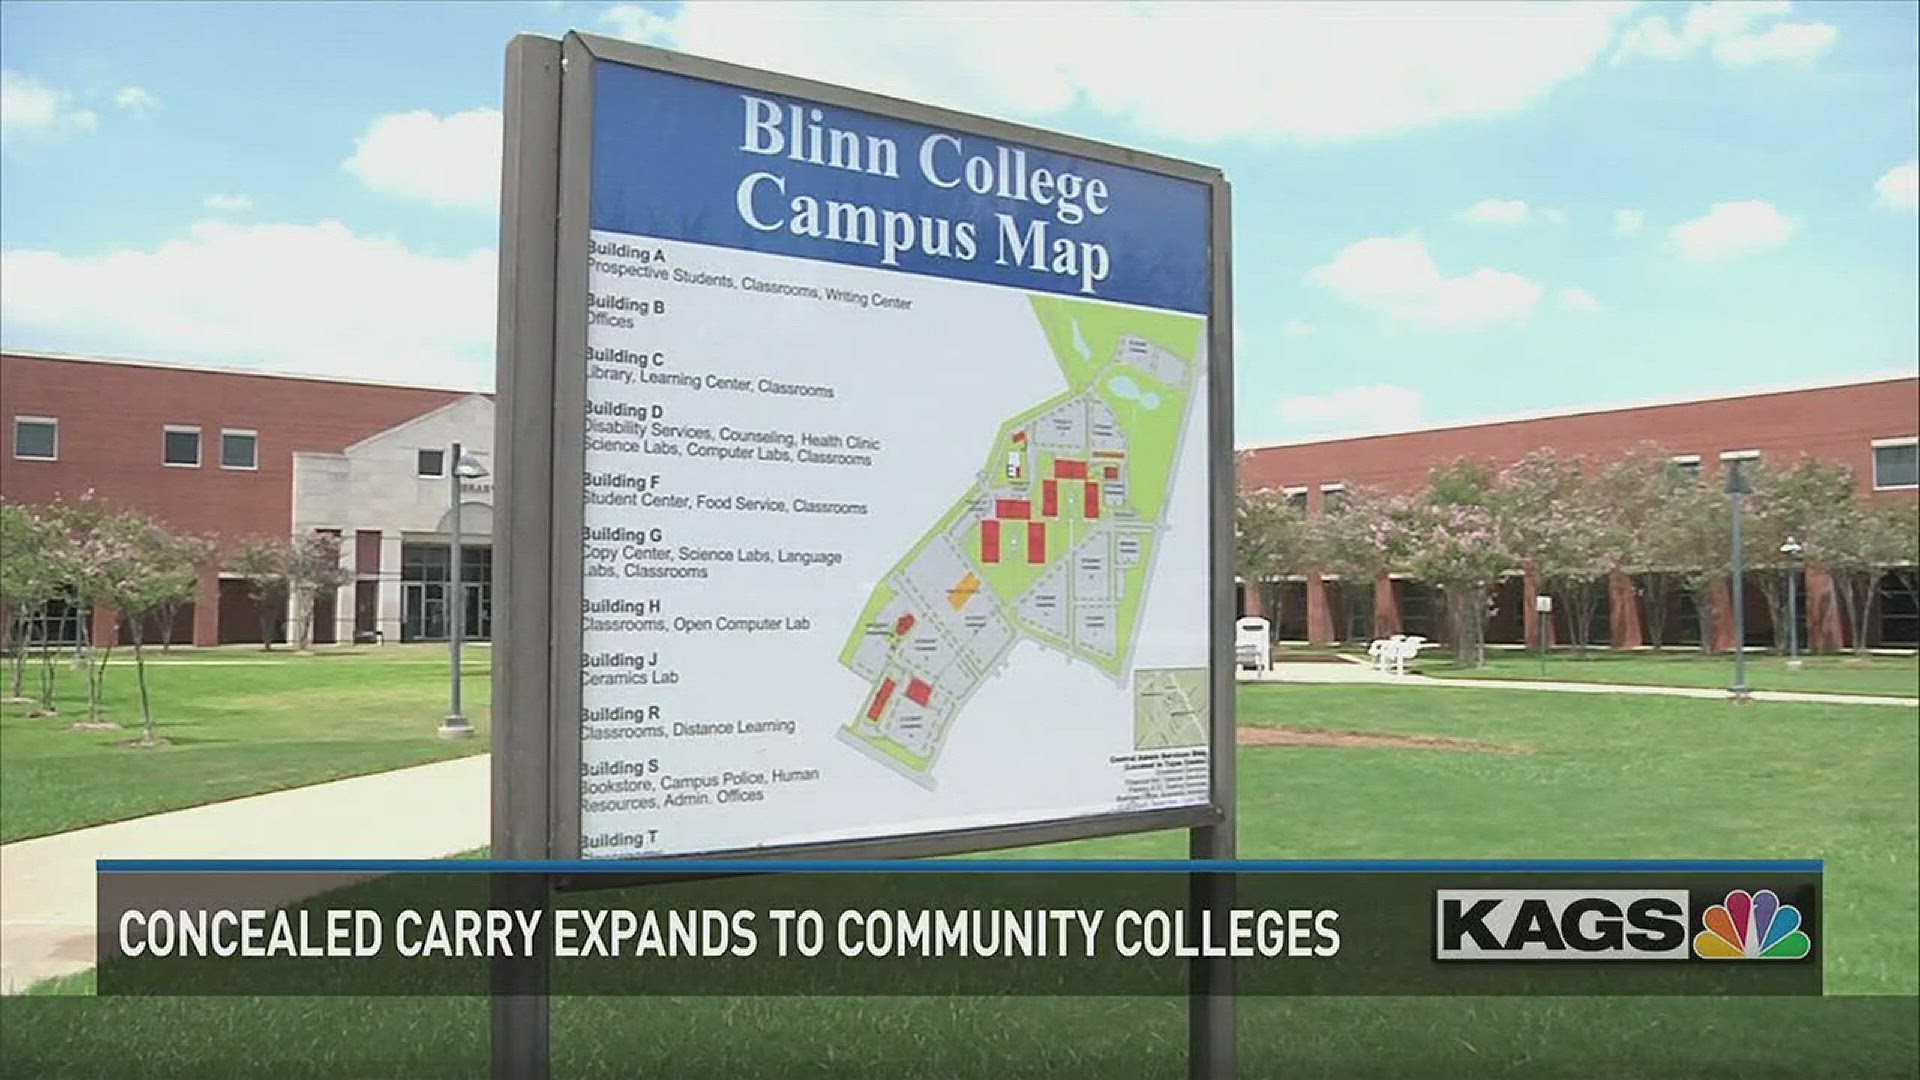 Blinn has been preparing for the expansion of campus carry for the past year.